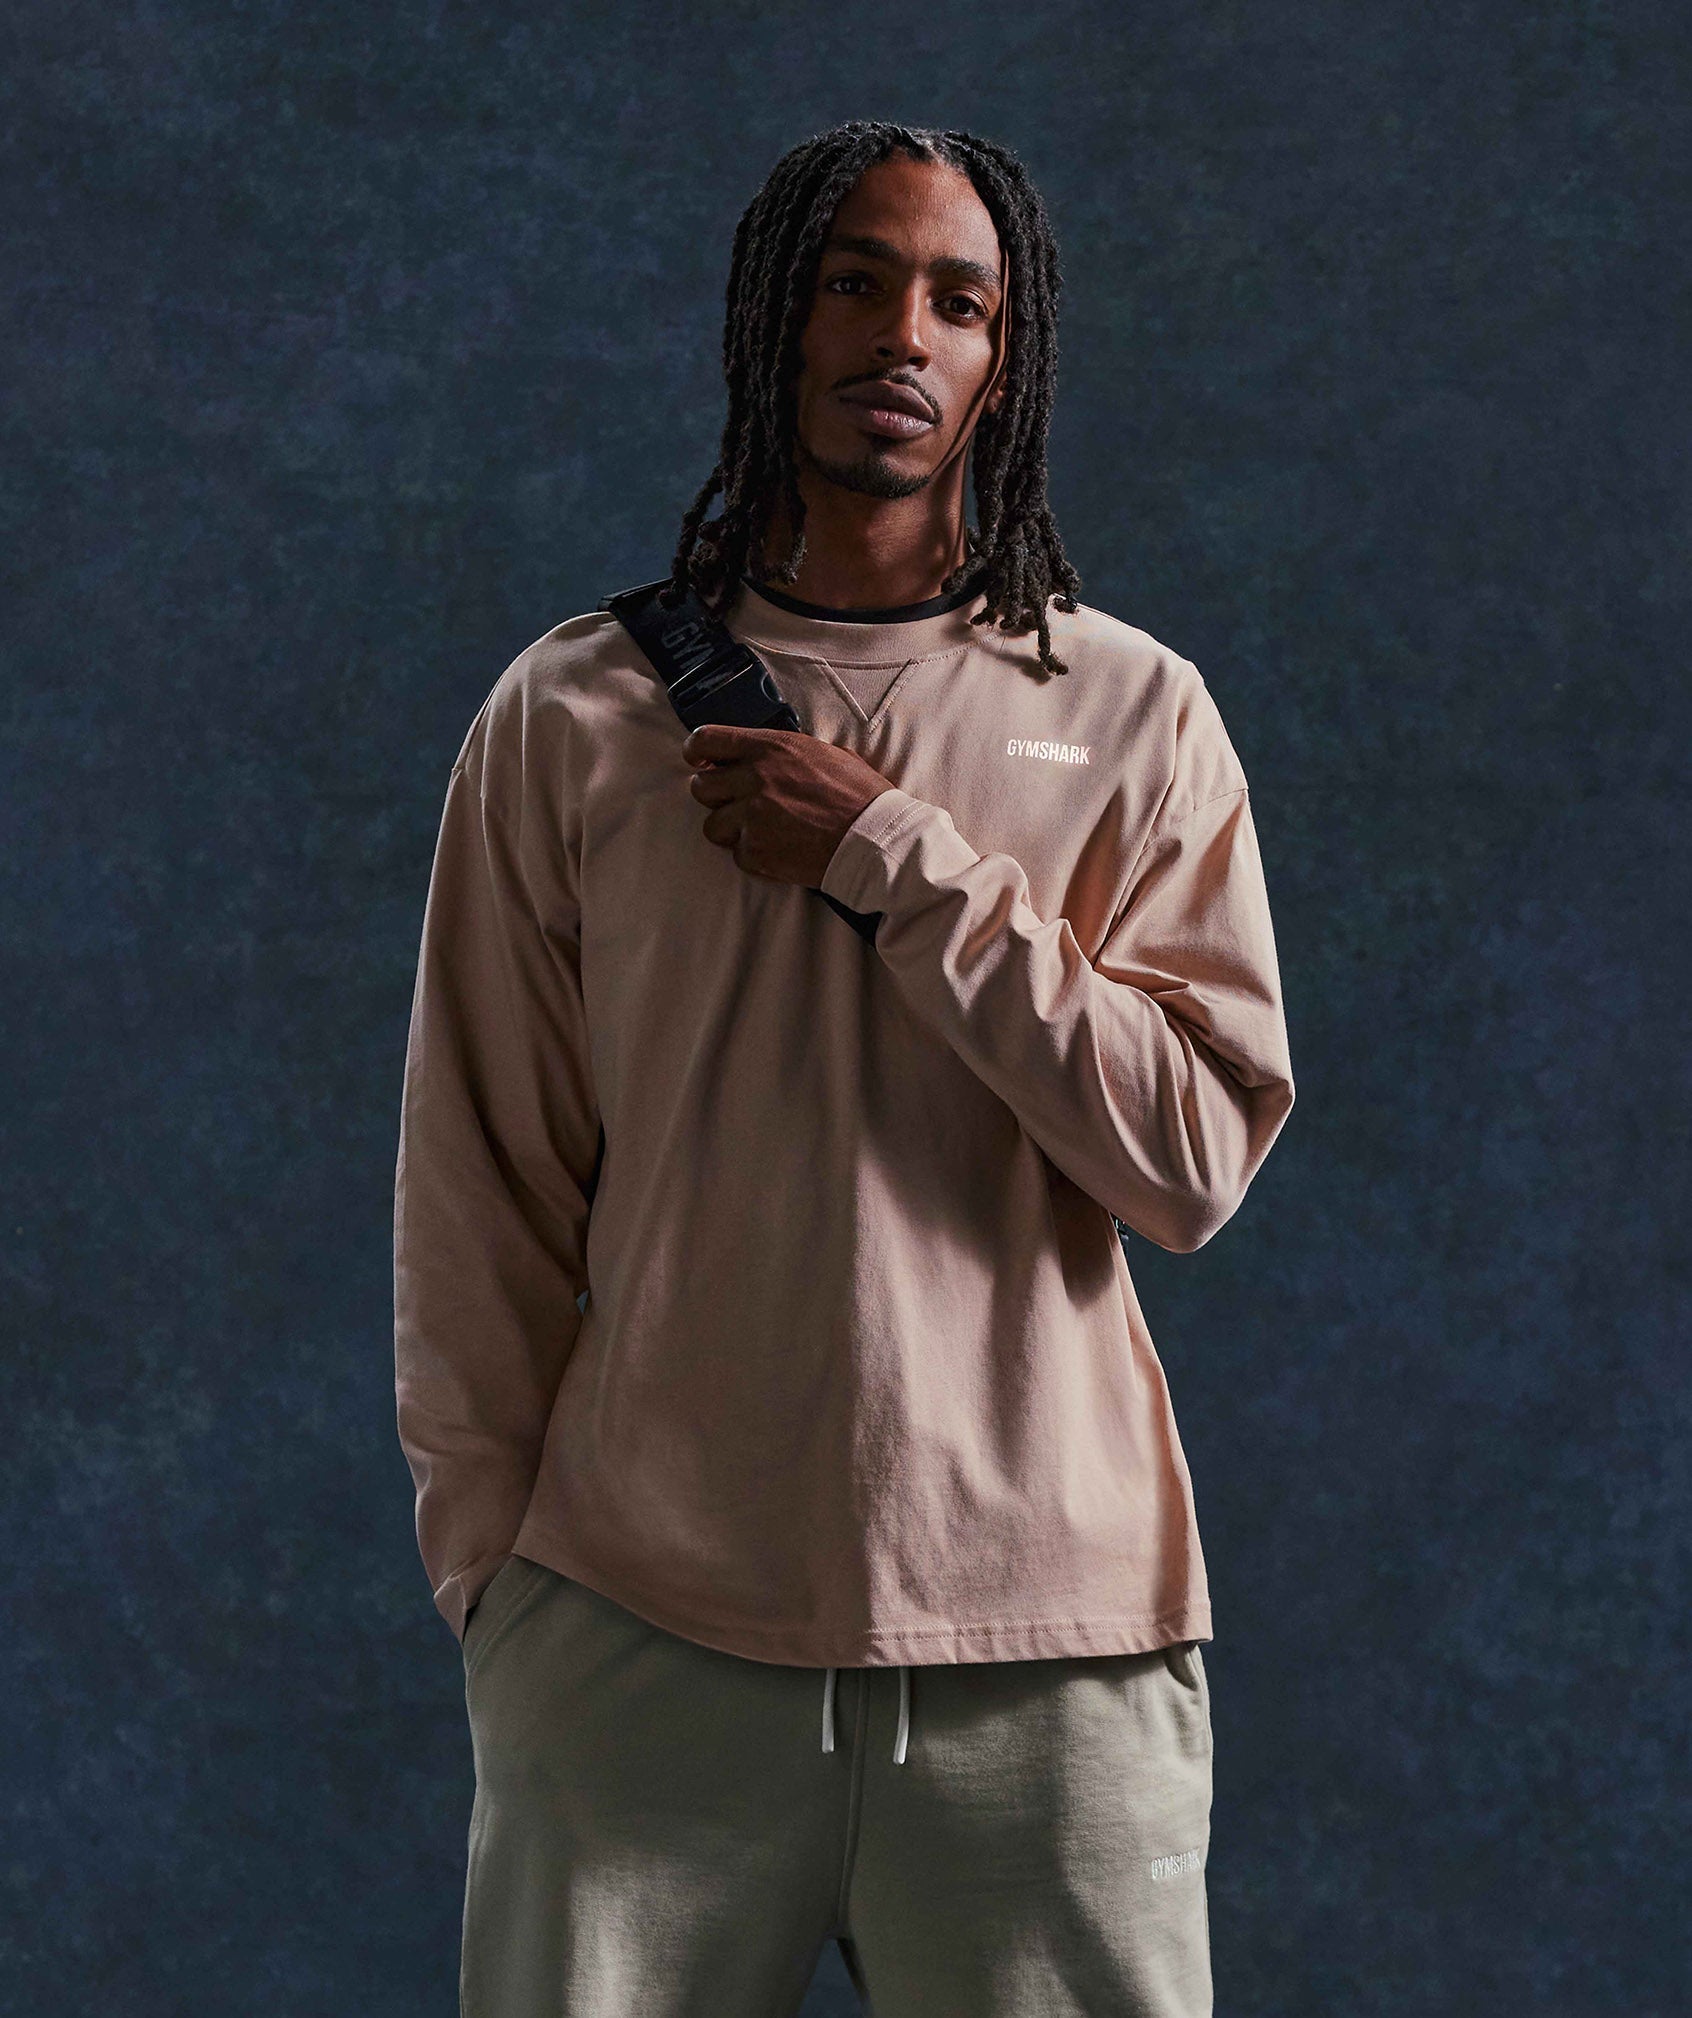 Rest Day Sweats Long Sleeve T-Shirt in Dusty Taupe